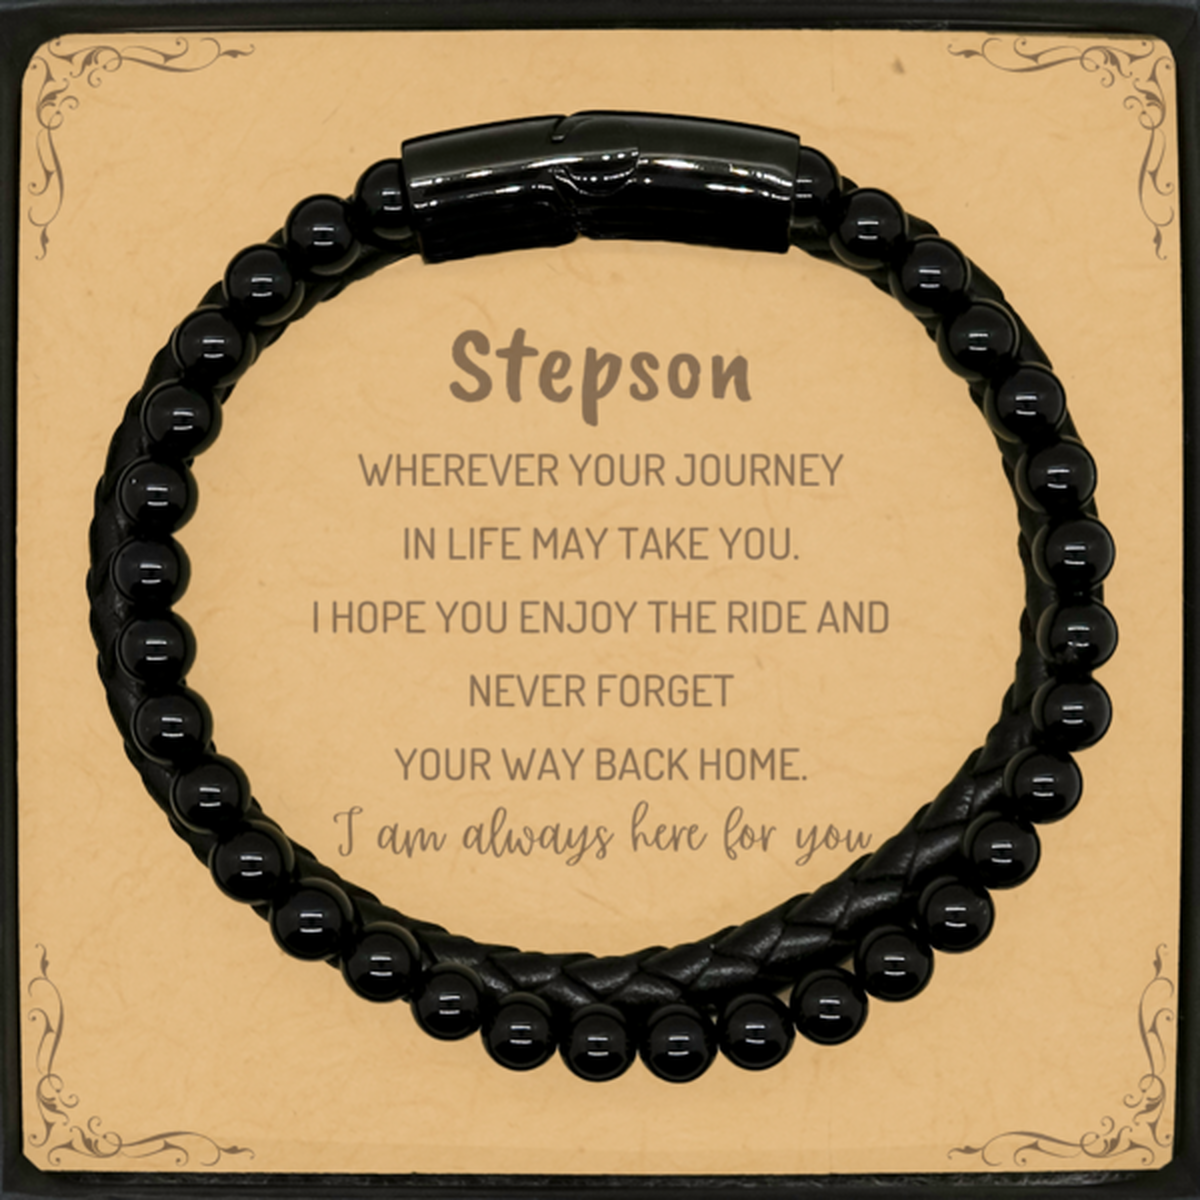 Stepson wherever your journey in life may take you, I am always here for you Stepson Stone Leather Bracelets, Awesome Christmas Gifts For Stepson Message Card, Stepson Birthday Gifts for Men Women Family Loved One